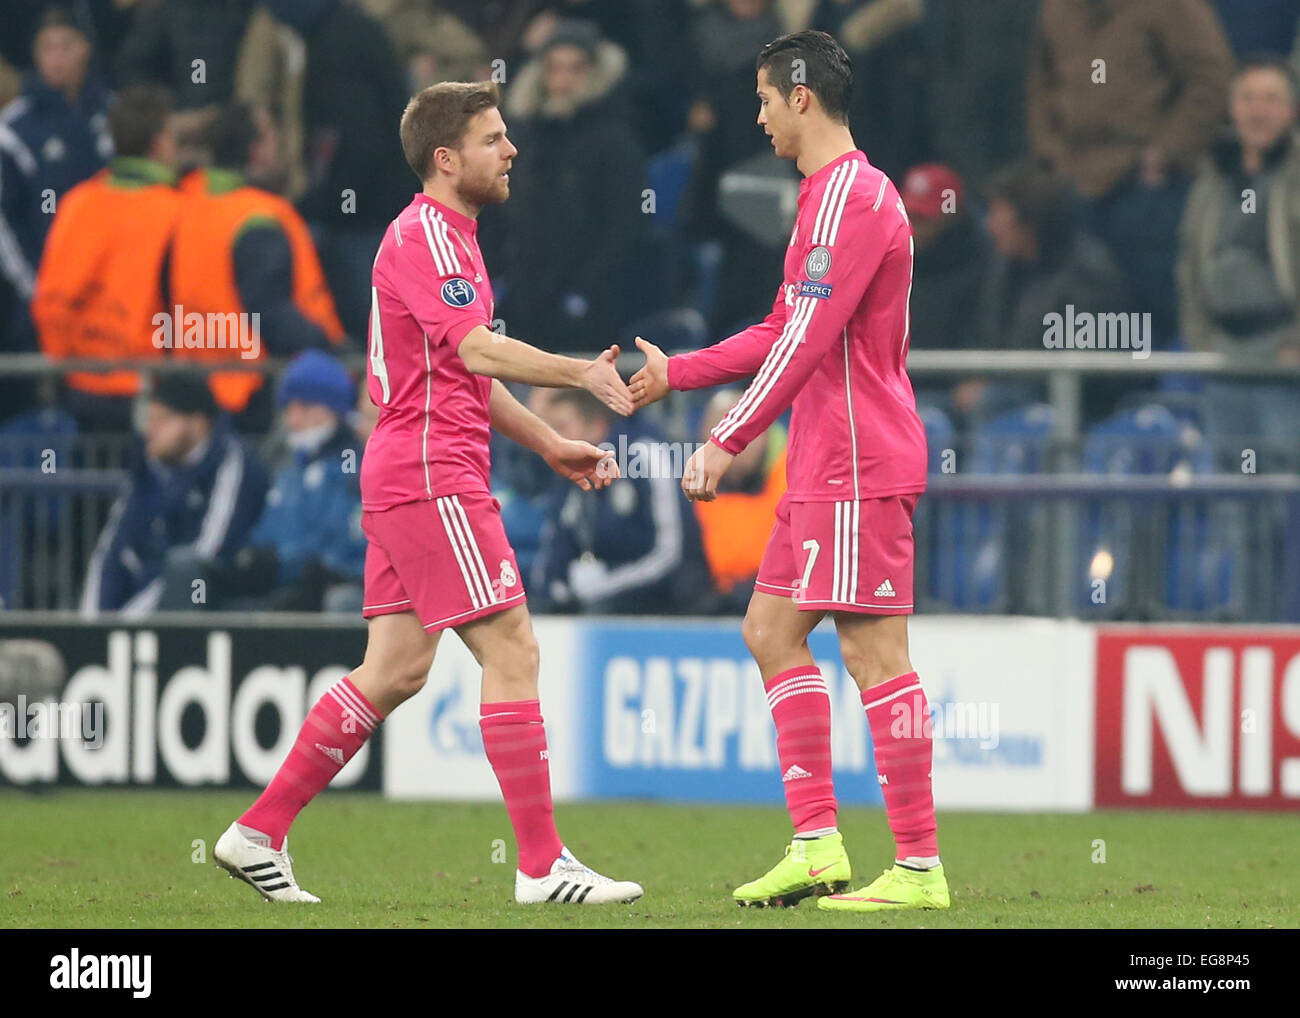 Gelsenkirchen, Germany. 18th Feb, 2015. Madrid's Cristiano Ronaldo (r) and Javier Hernandez (l) during the Champions League Round of 16 match FC Schalke 04 vs Real Madrid in Gelsenkirchen, Germany, 18 February 2015. Photo: Friso Gentsch/dpa/Alamy Live News Stock Photo